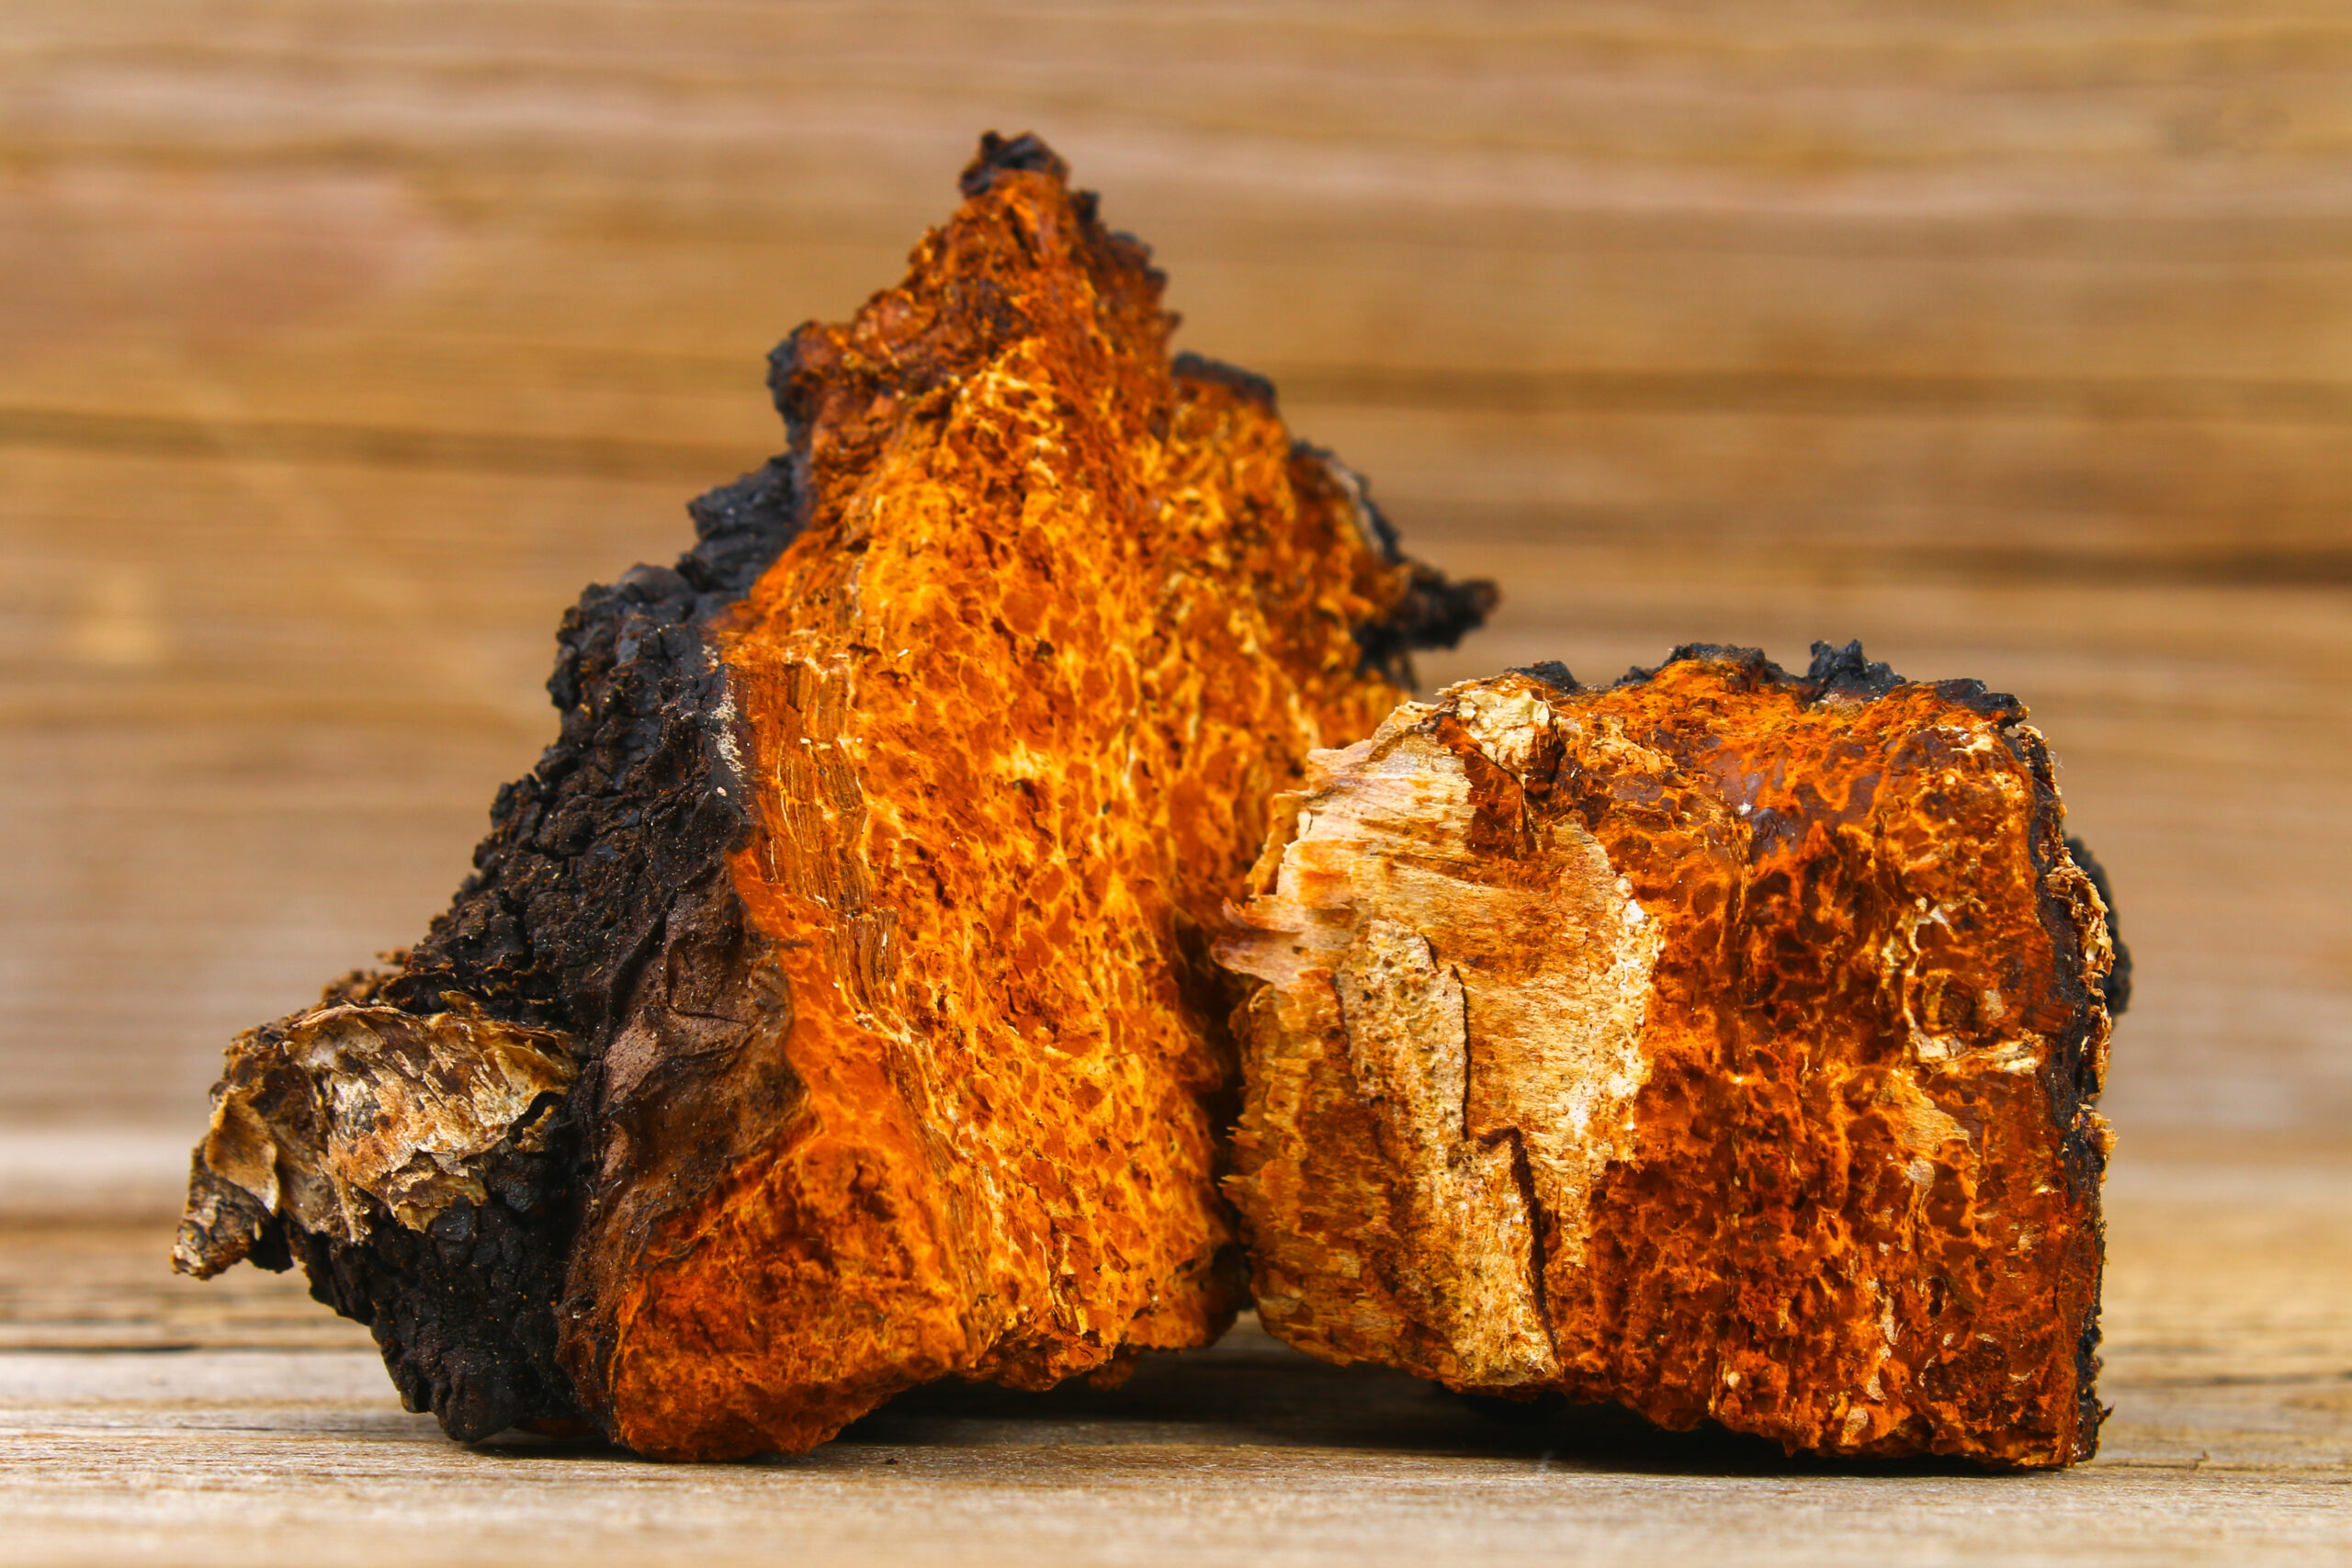 The potential of Chaga